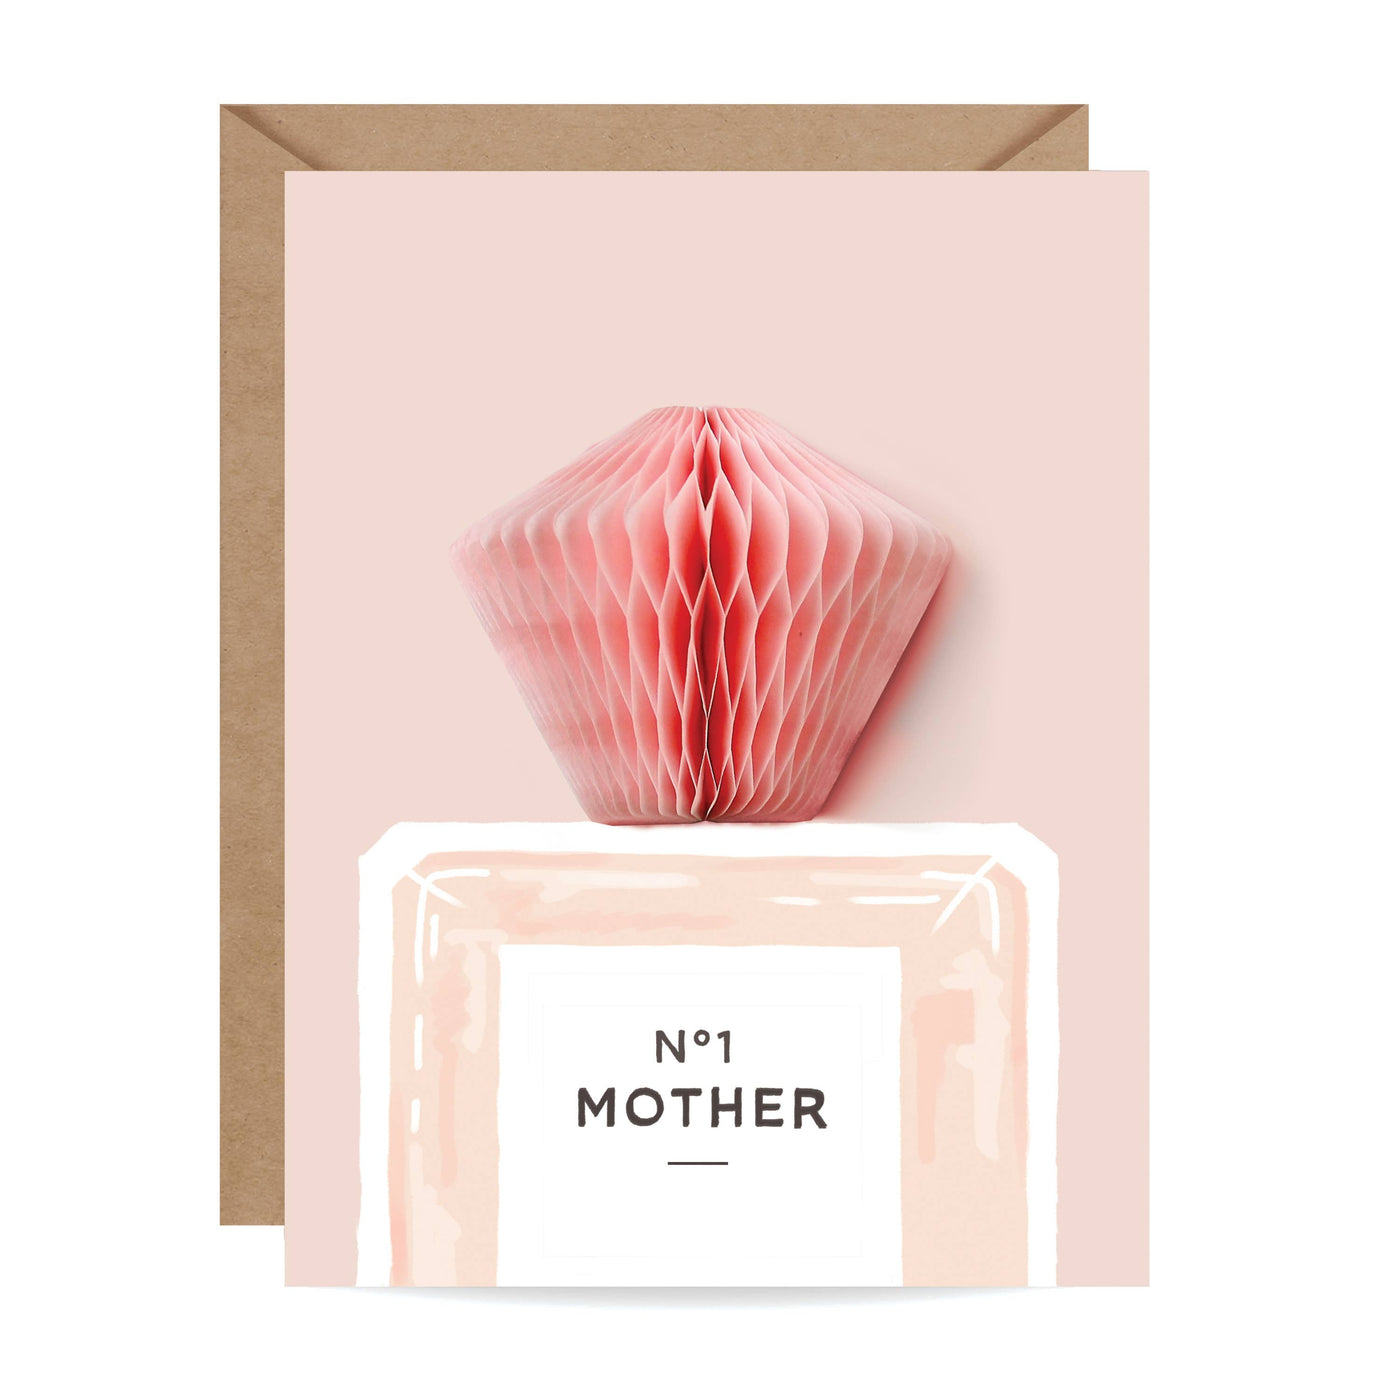 No. 1 Mother Pop-up Mother's Day Card - The Grey Pearl